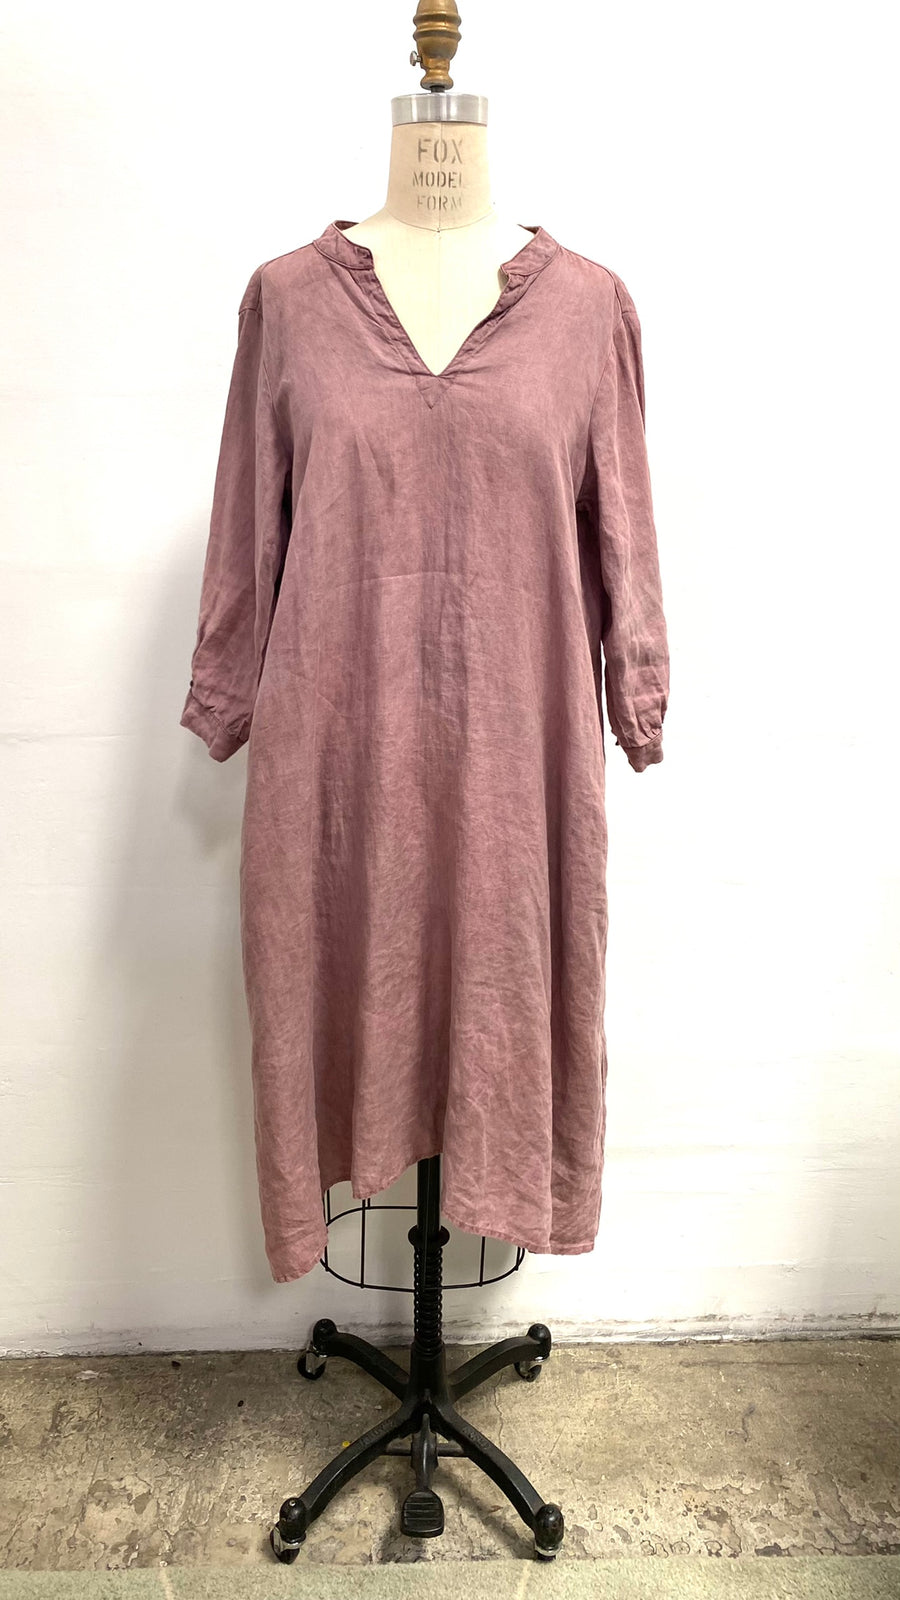 Rose Organic Linen Celeste Dress with Pockets - The Perfect Dress for Every Occasion